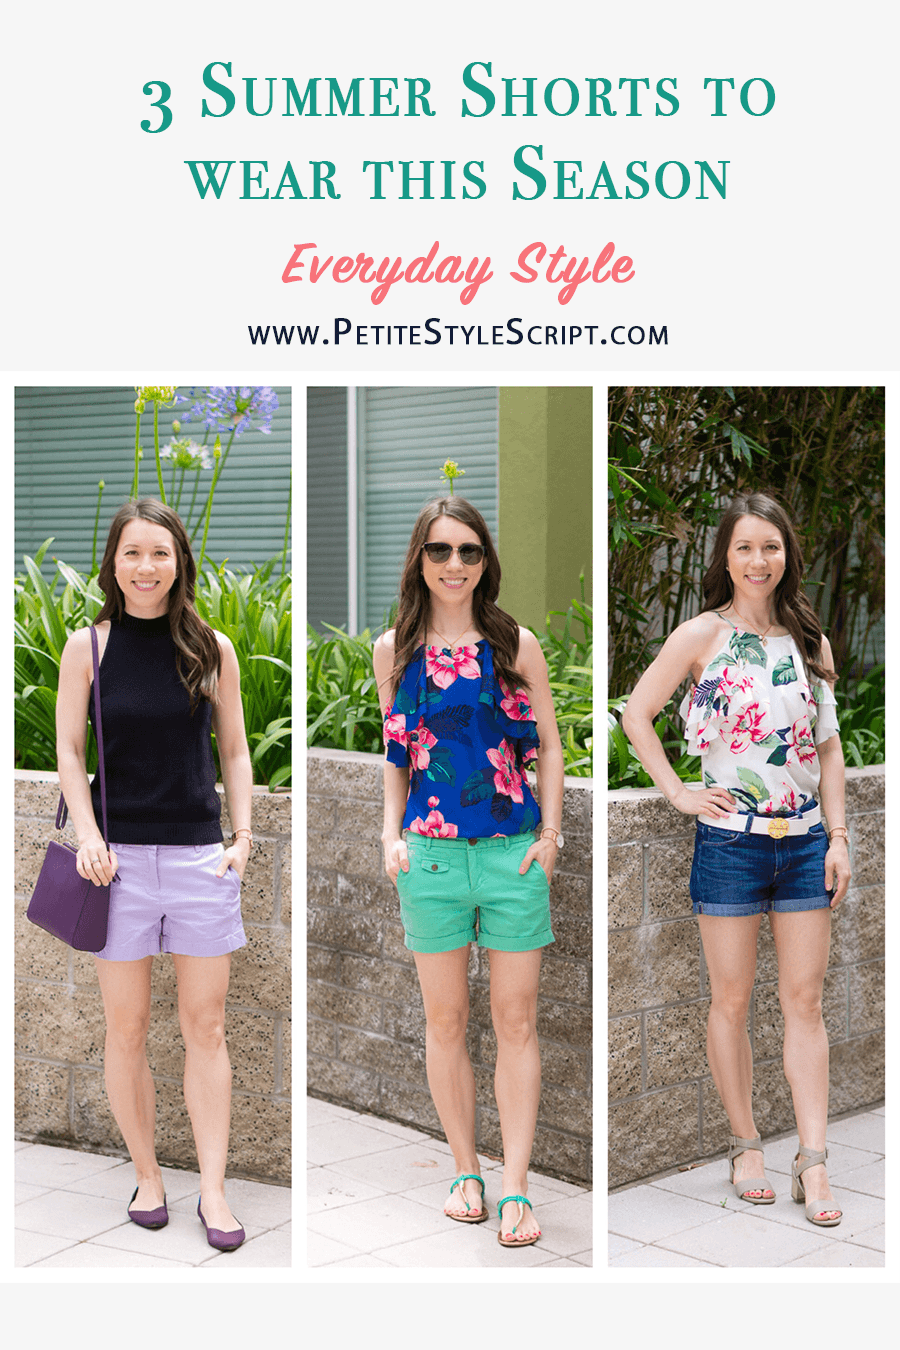 Three Ways to Wear Summer Shorts | Rothy's ballet flats in purple wine with J. Crew Factory lilac shorts and Lo & Son's crossbody bag | Banana Republic shorts and floral top with M. Gemi Attorno sandals | Paige denim shorts with floral top and Tory Burch reversible belt | Petite fashion and style blog with KonMari Philosophy in fashion and capsule wardrobe